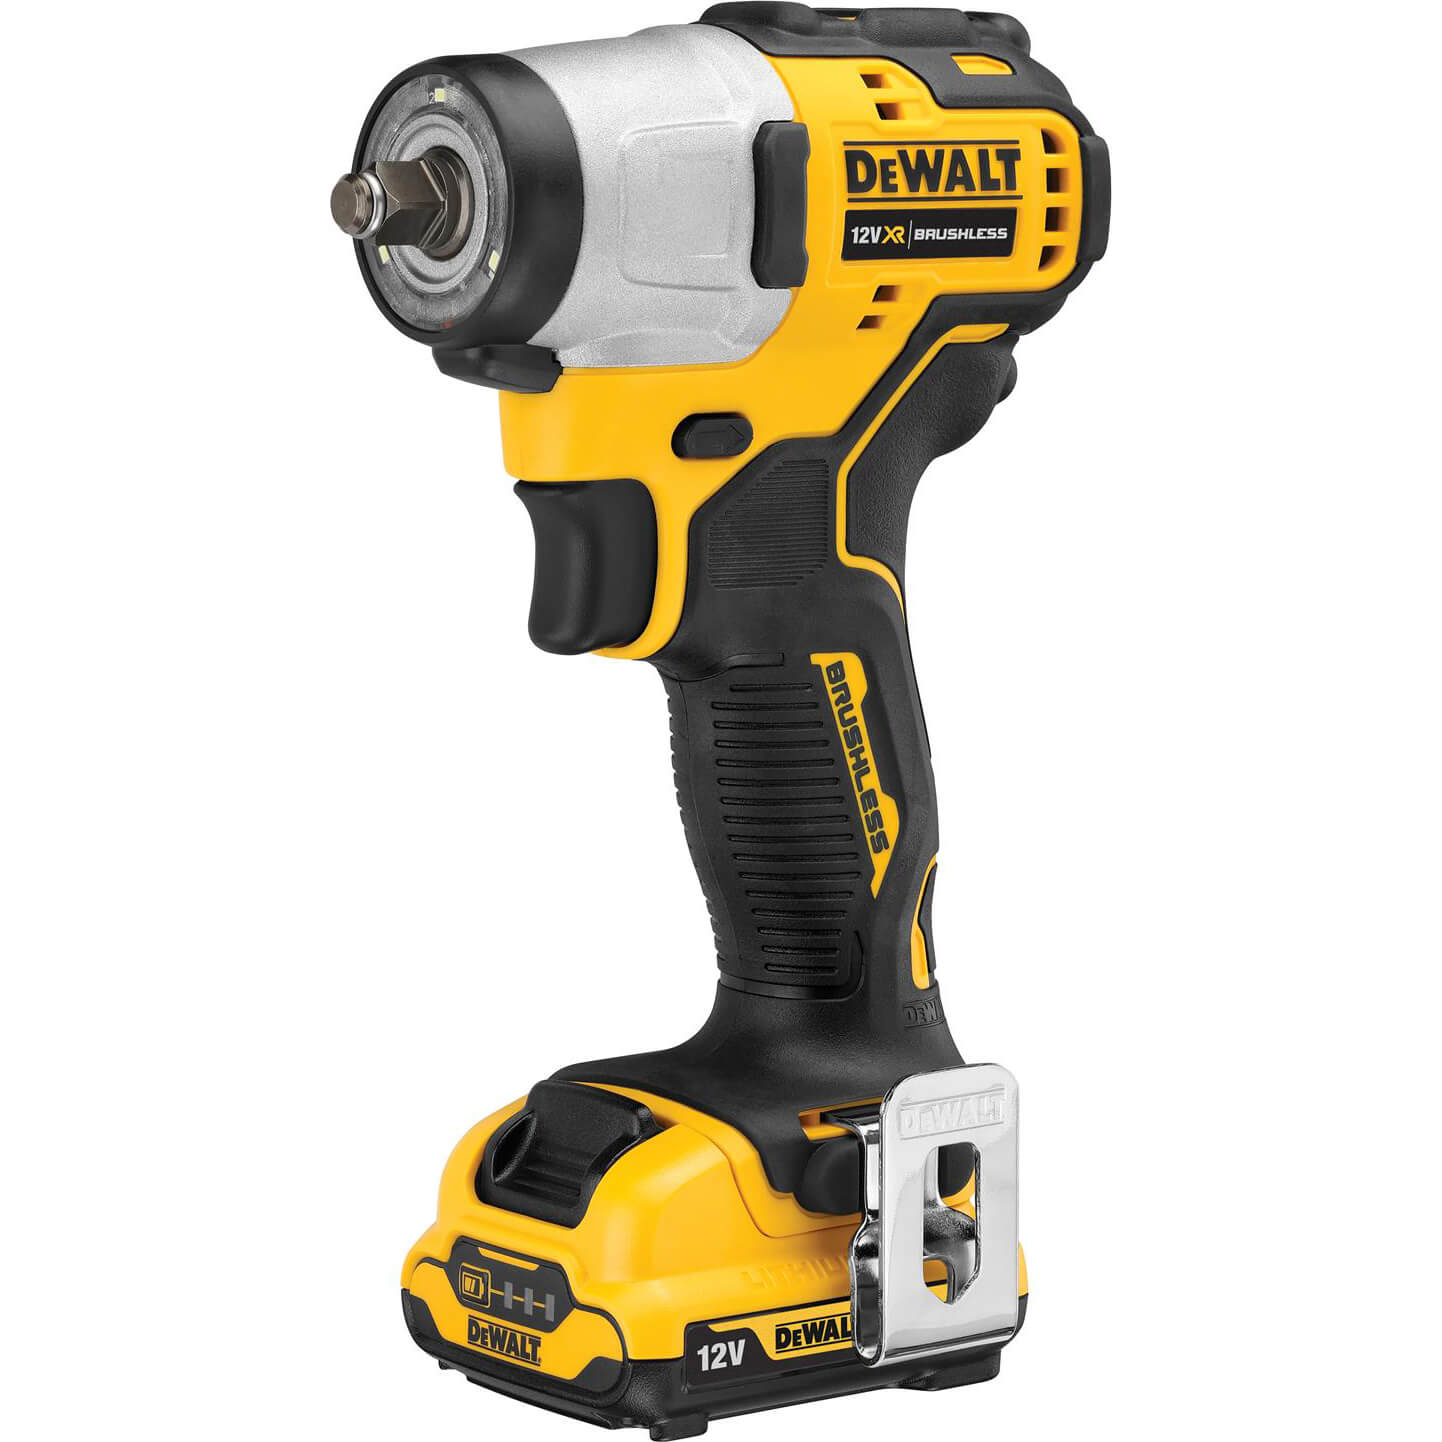 DeWalt DCF902 12v XR Cordless Brushless Compact 3/8" Drive Impact Wrench 2 x 2ah Li-ion Charger Case